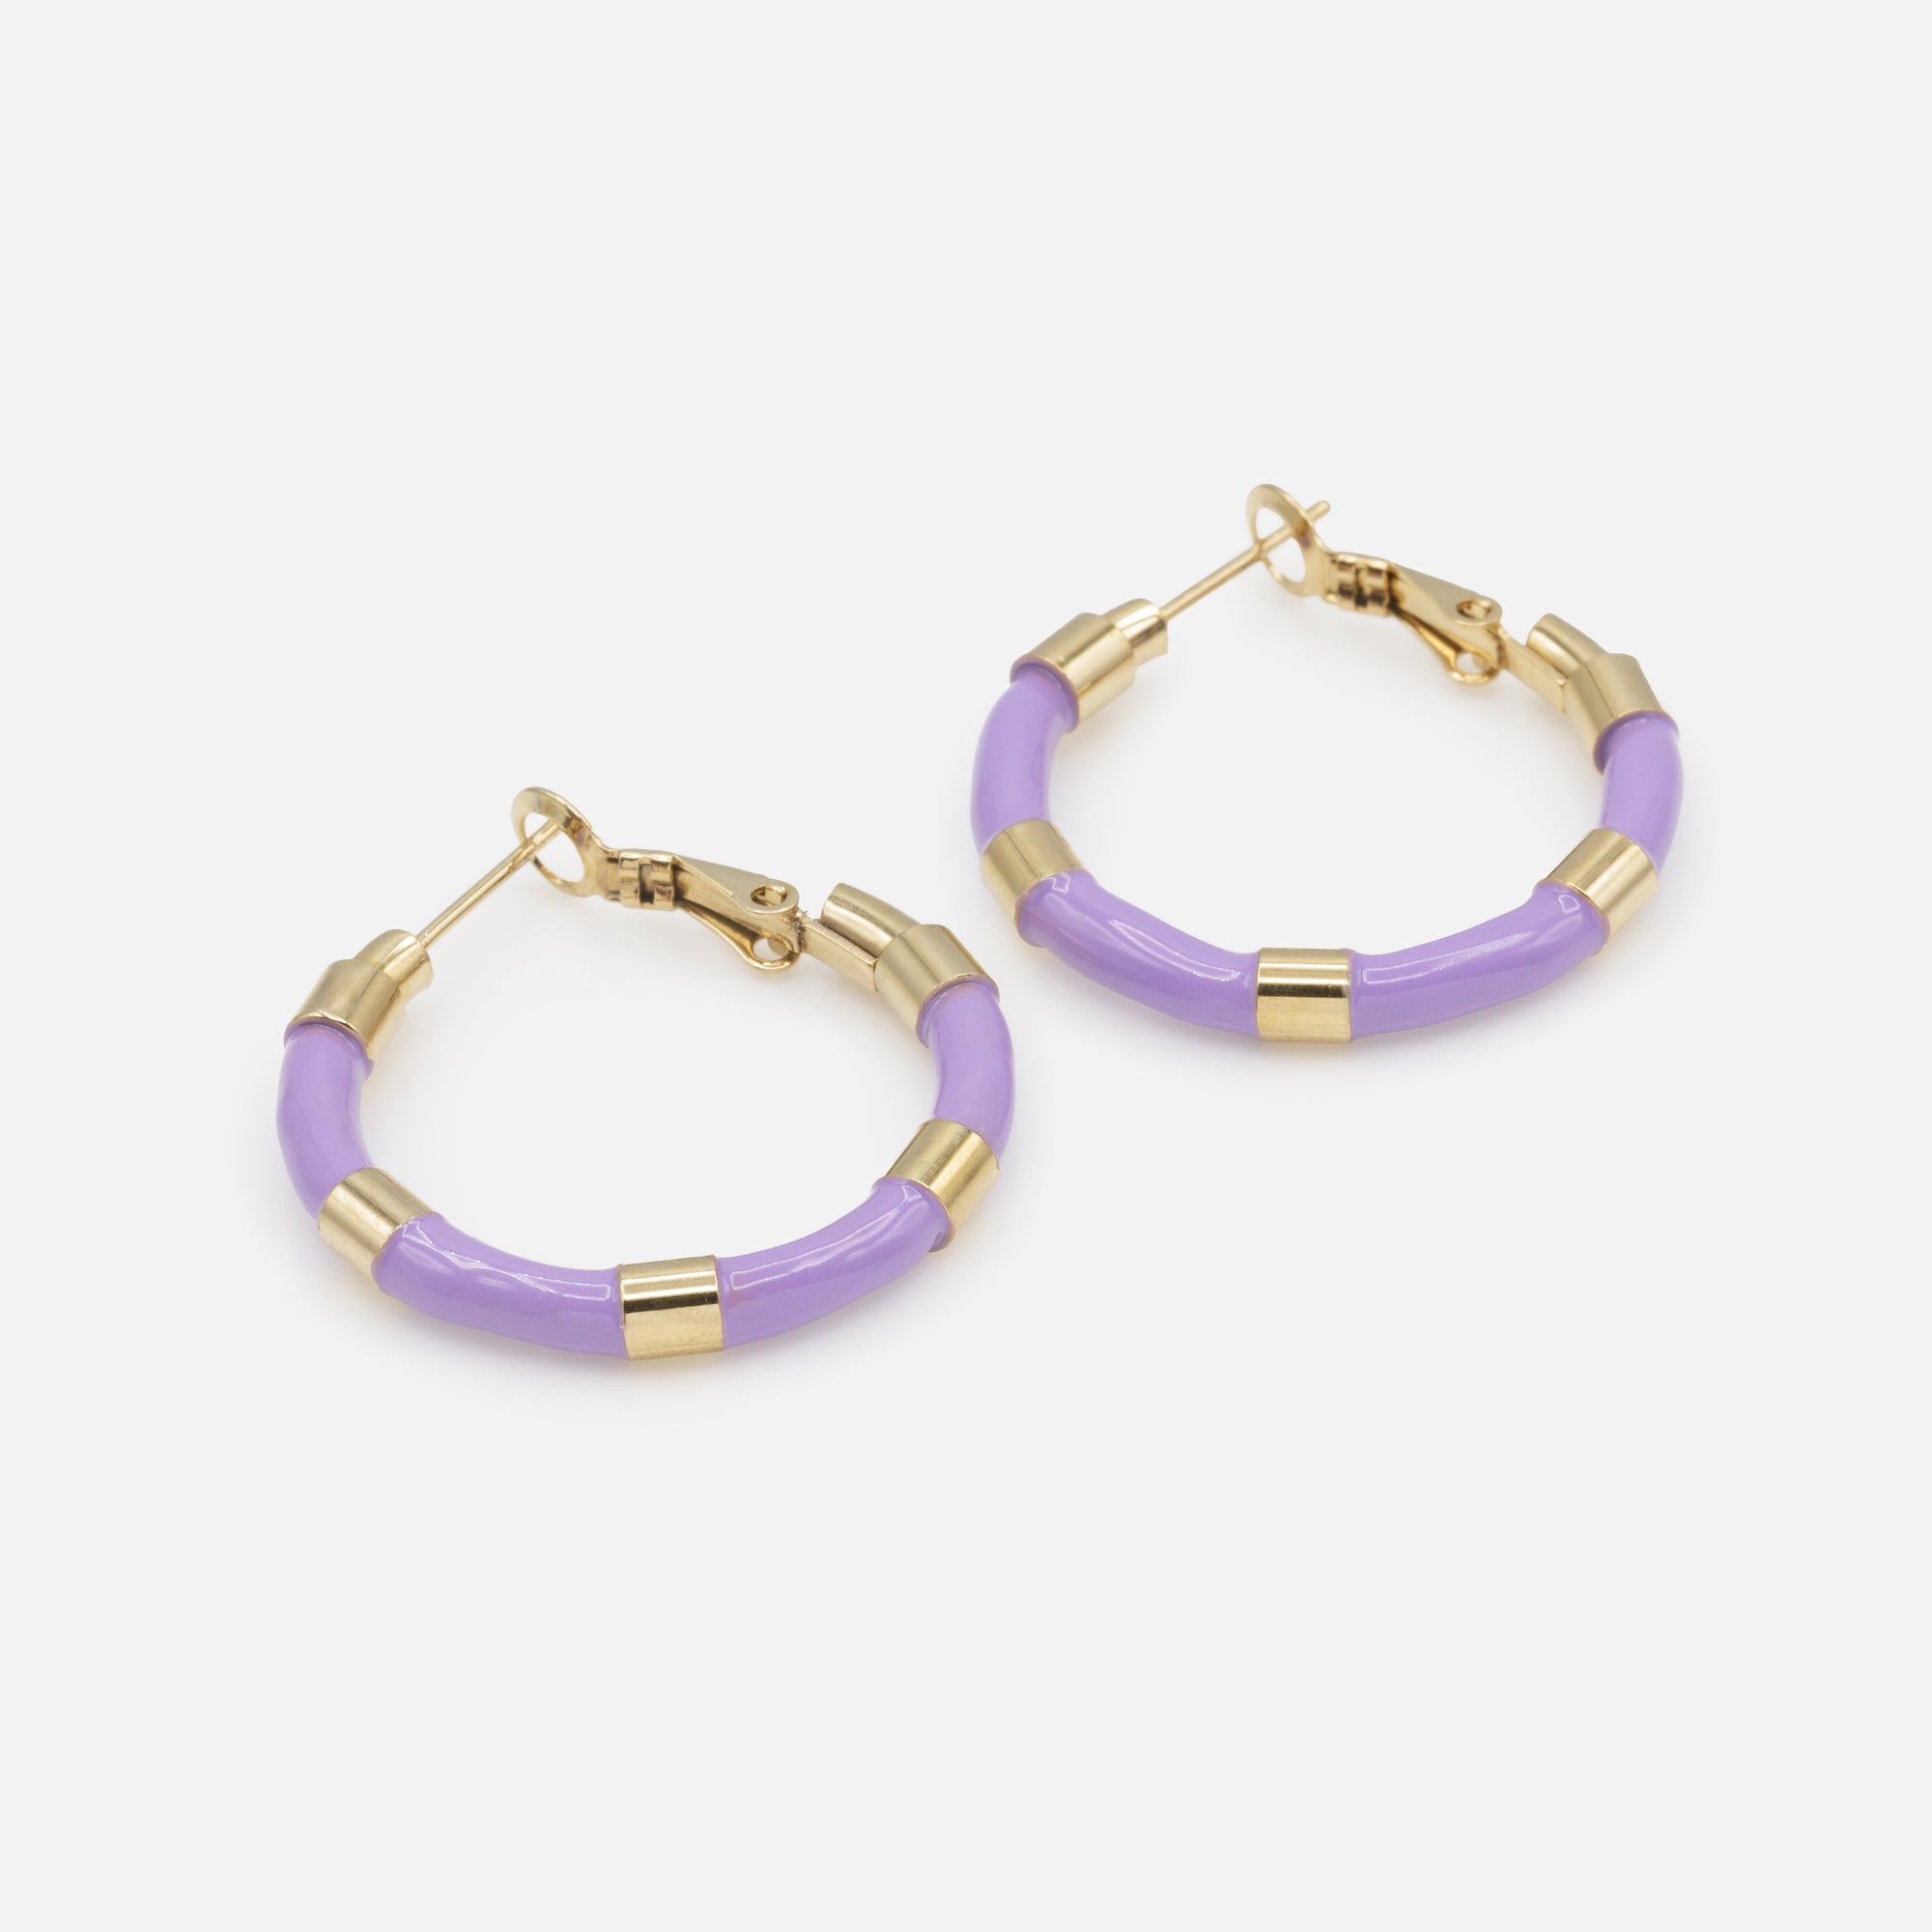 Lilac hoop earrings and gold cylinders in stainless steel